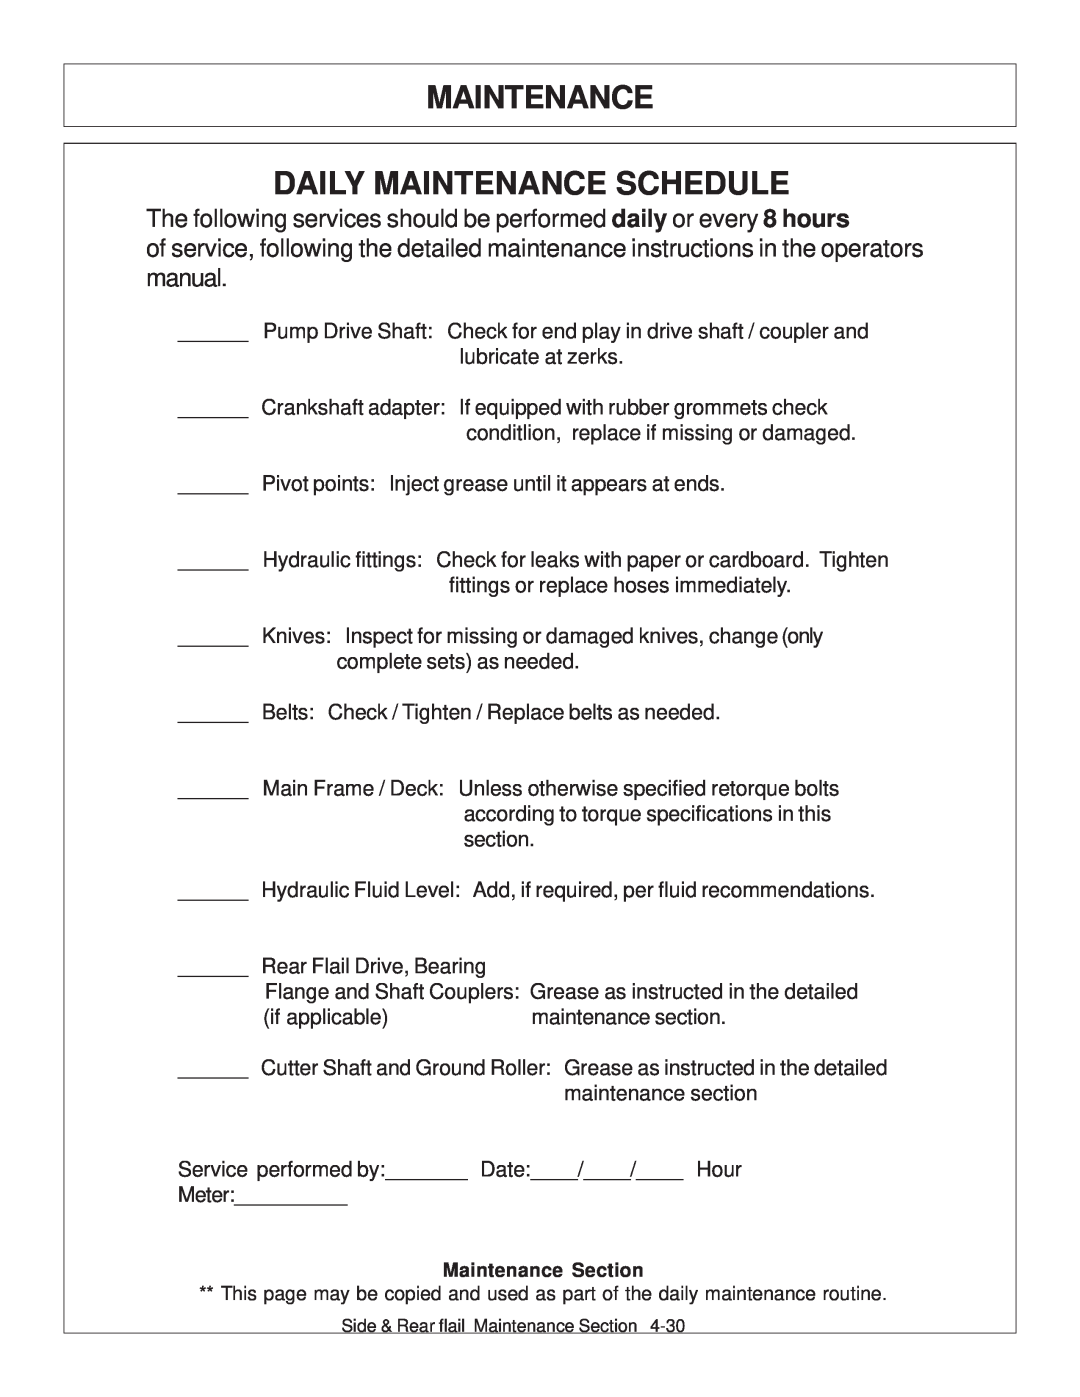 Tiger JD 5101E Maintenance Daily Maintenance Schedule, The following services should be performed daily or every 8 hours 